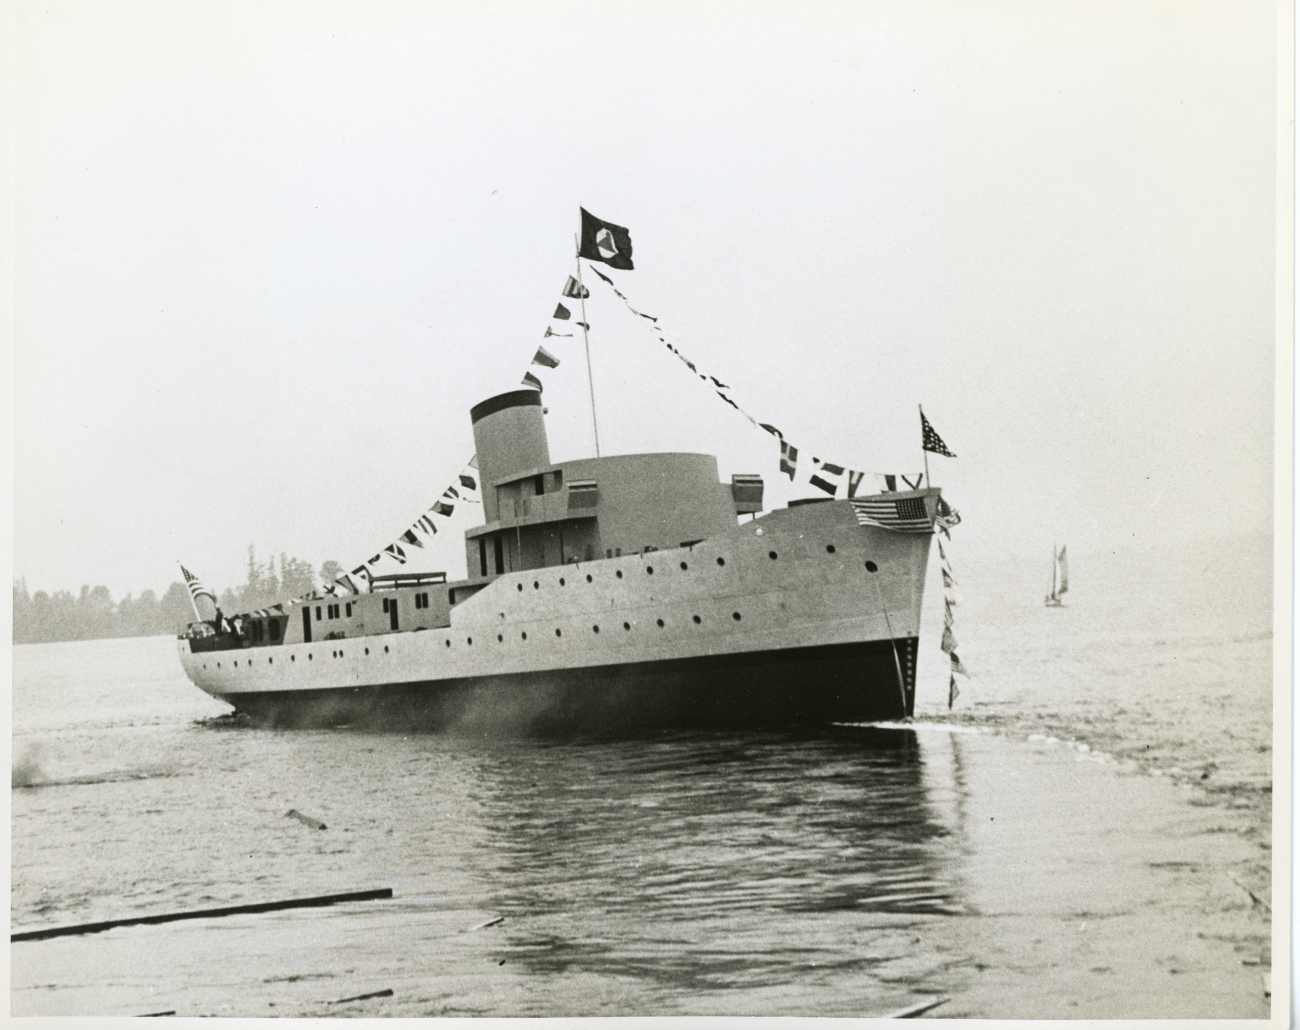 The new USC&GS; Ship EXPLORER shortly after launching